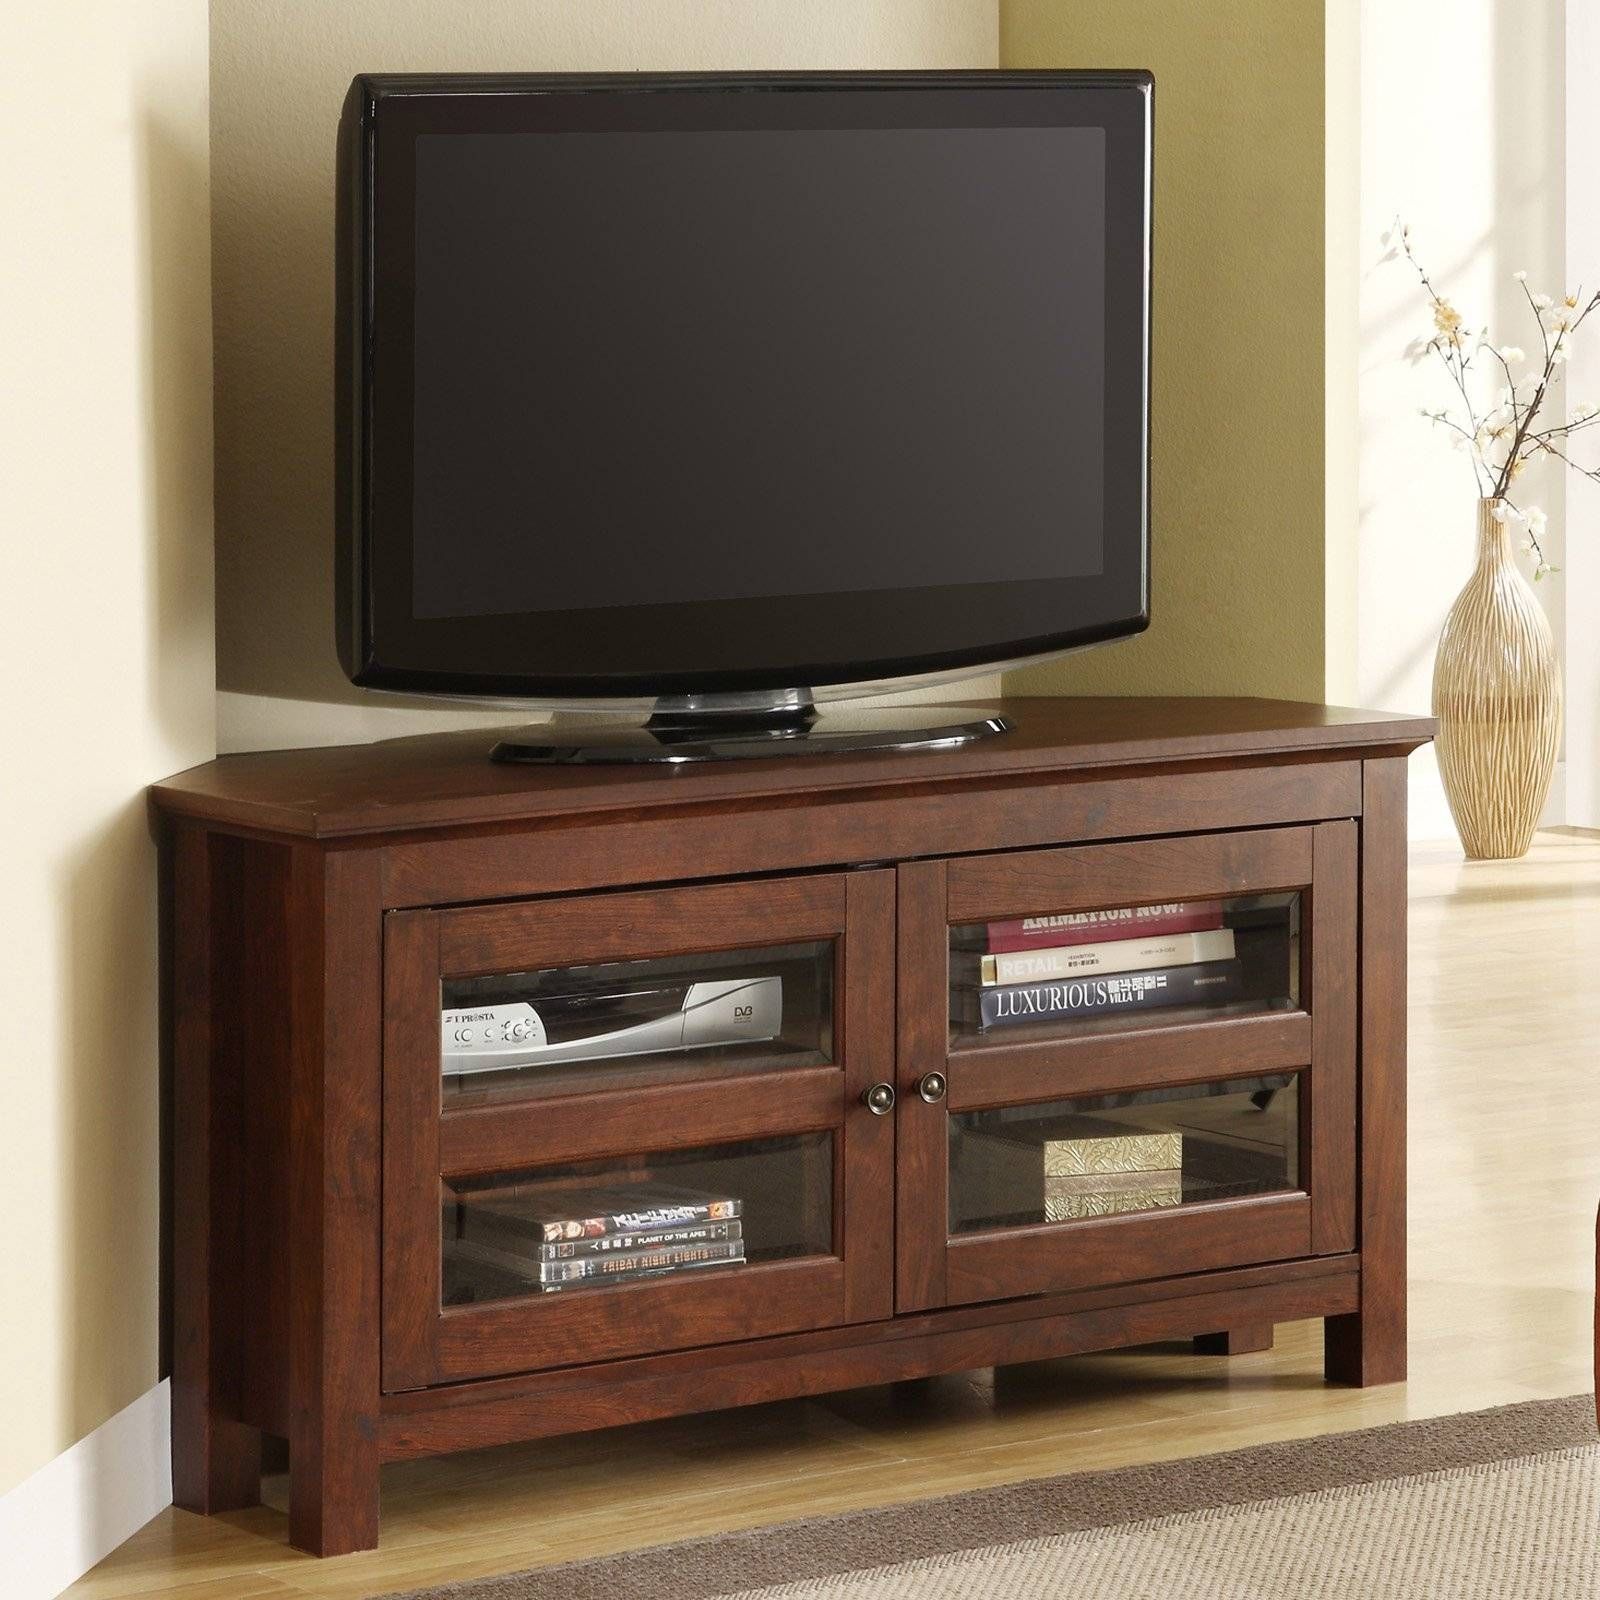 Modest Glass Wood Enclosed Tv Cabinets For Flat Screens With Doors Throughout Enclosed Tv Cabinets With Doors (View 8 of 15)